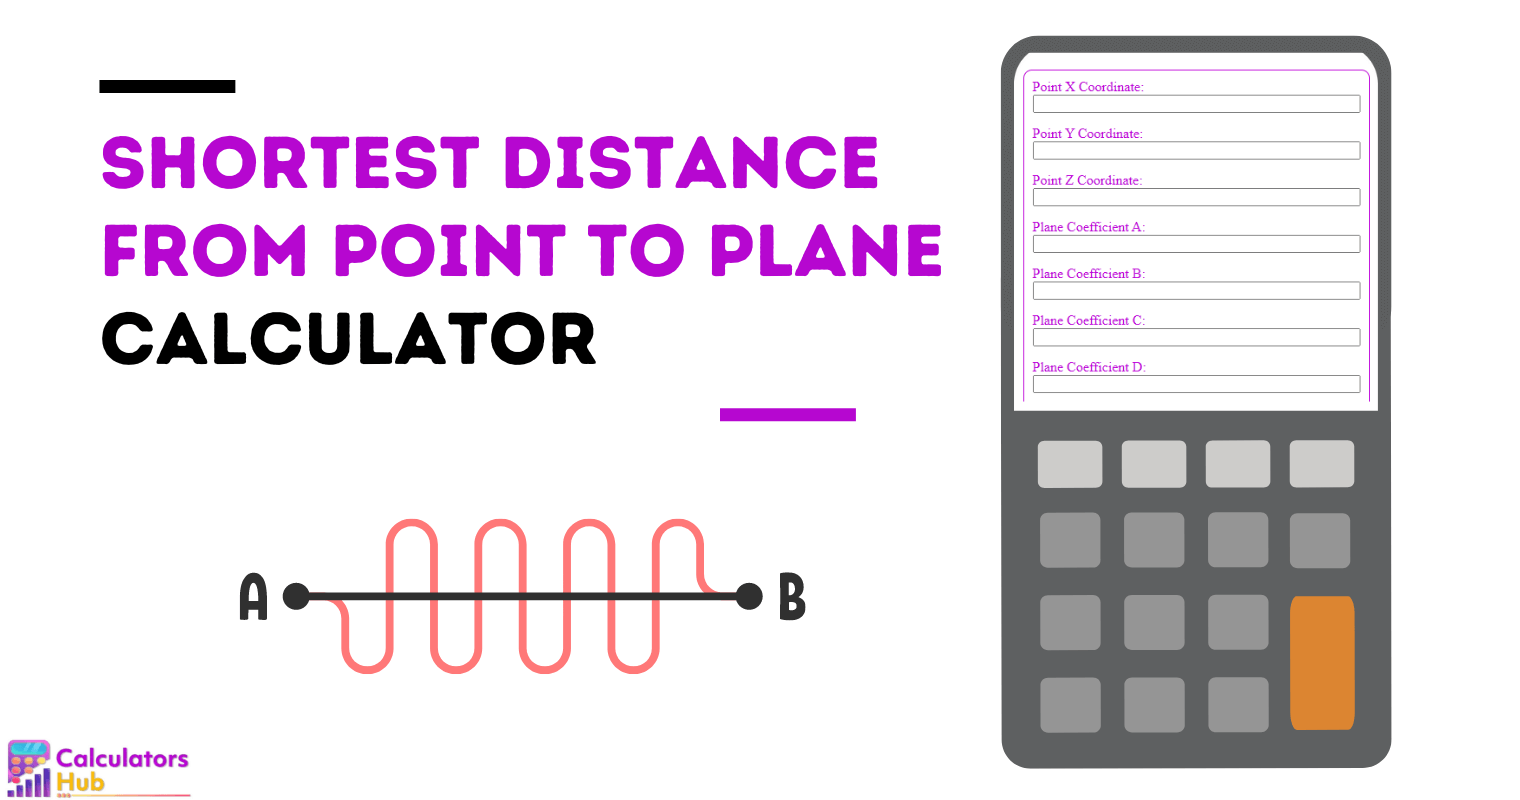 Shortest Distance From Point to Plane Calculator